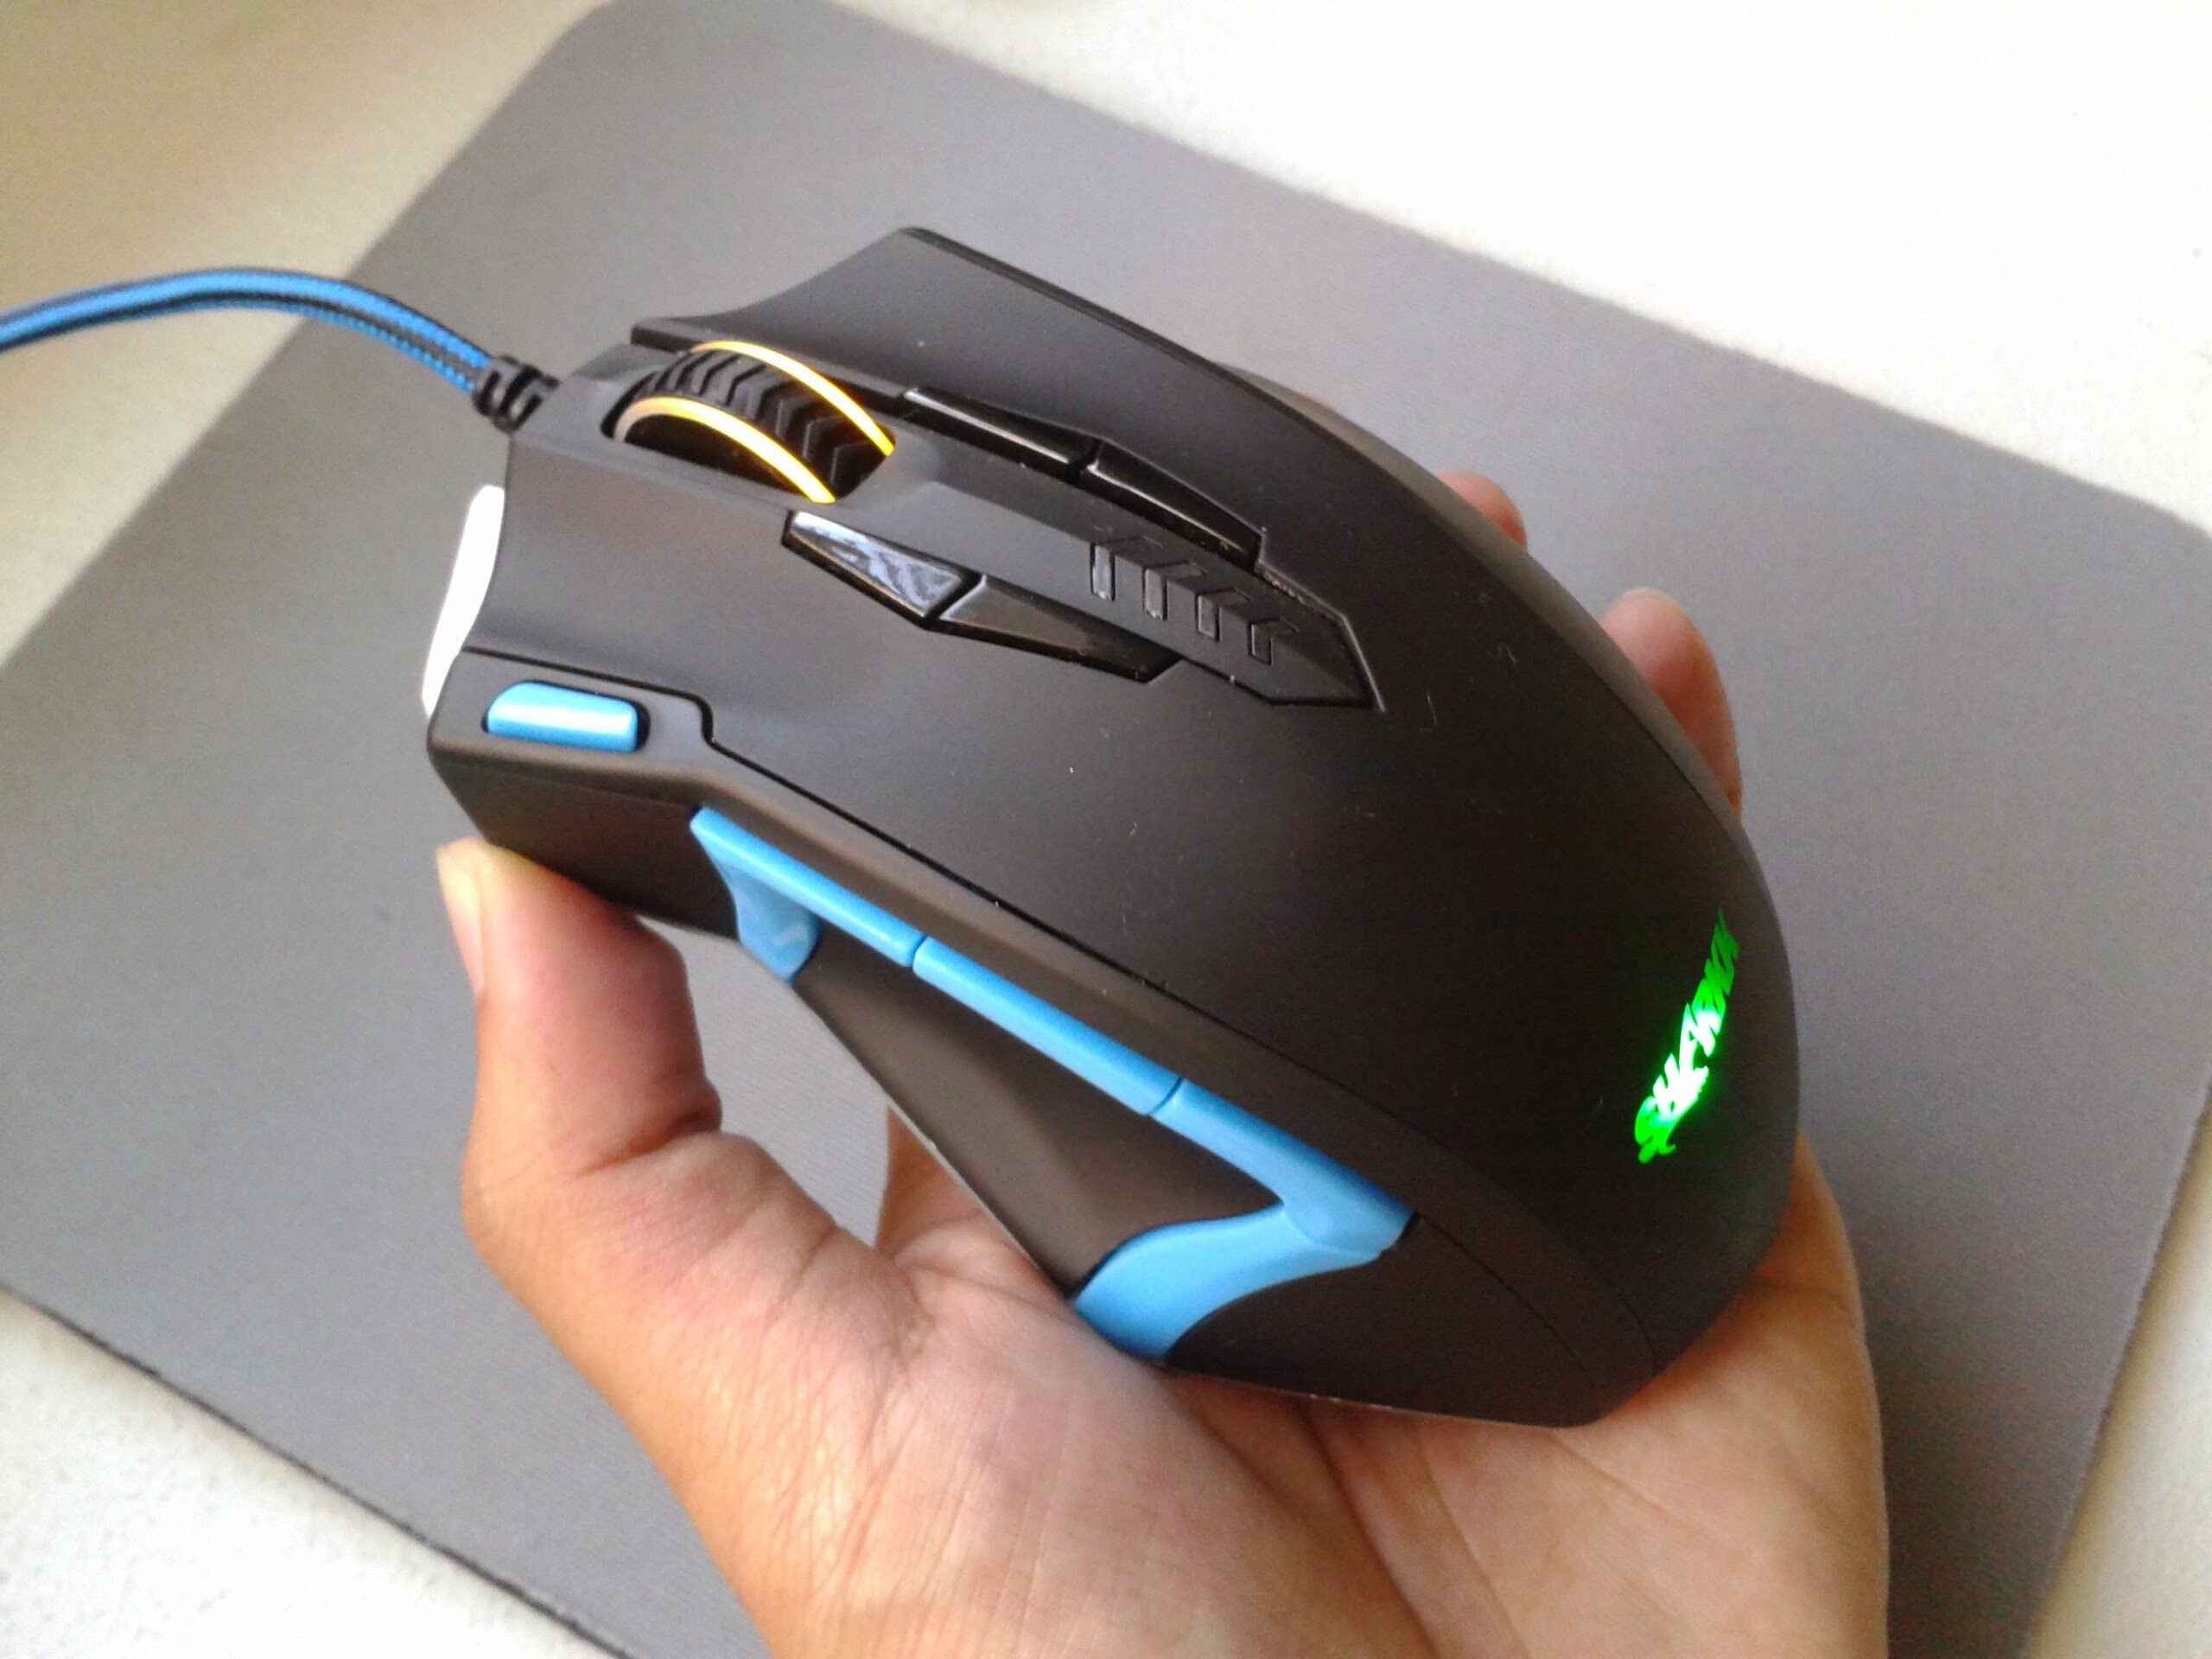 How To Pair The Sharkk 2491 Gaming Mouse